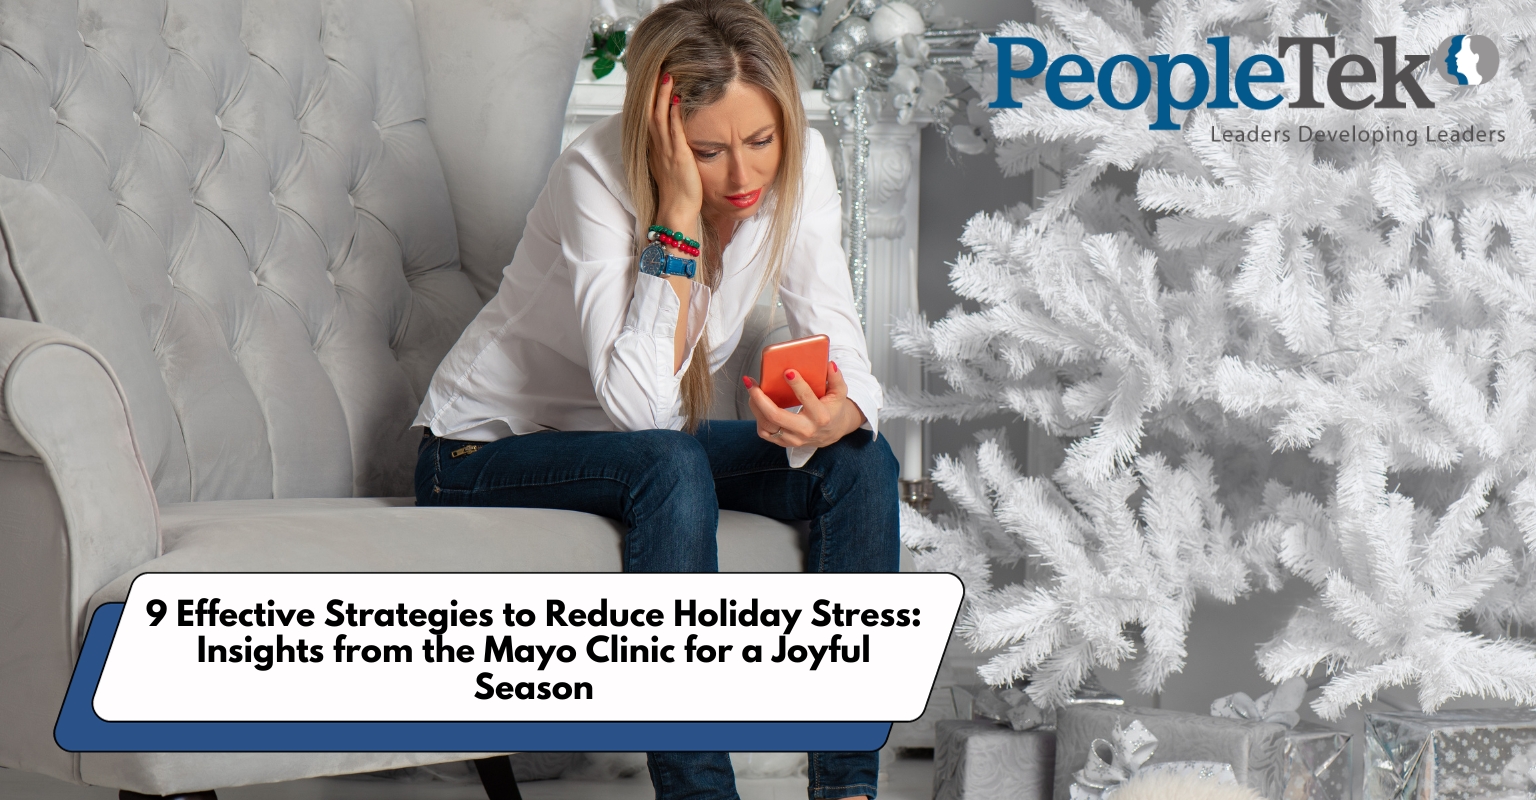 9 Effective Strategies to Reduce Holiday Stress: Insights from the Mayo Clinic for a Joyful Season